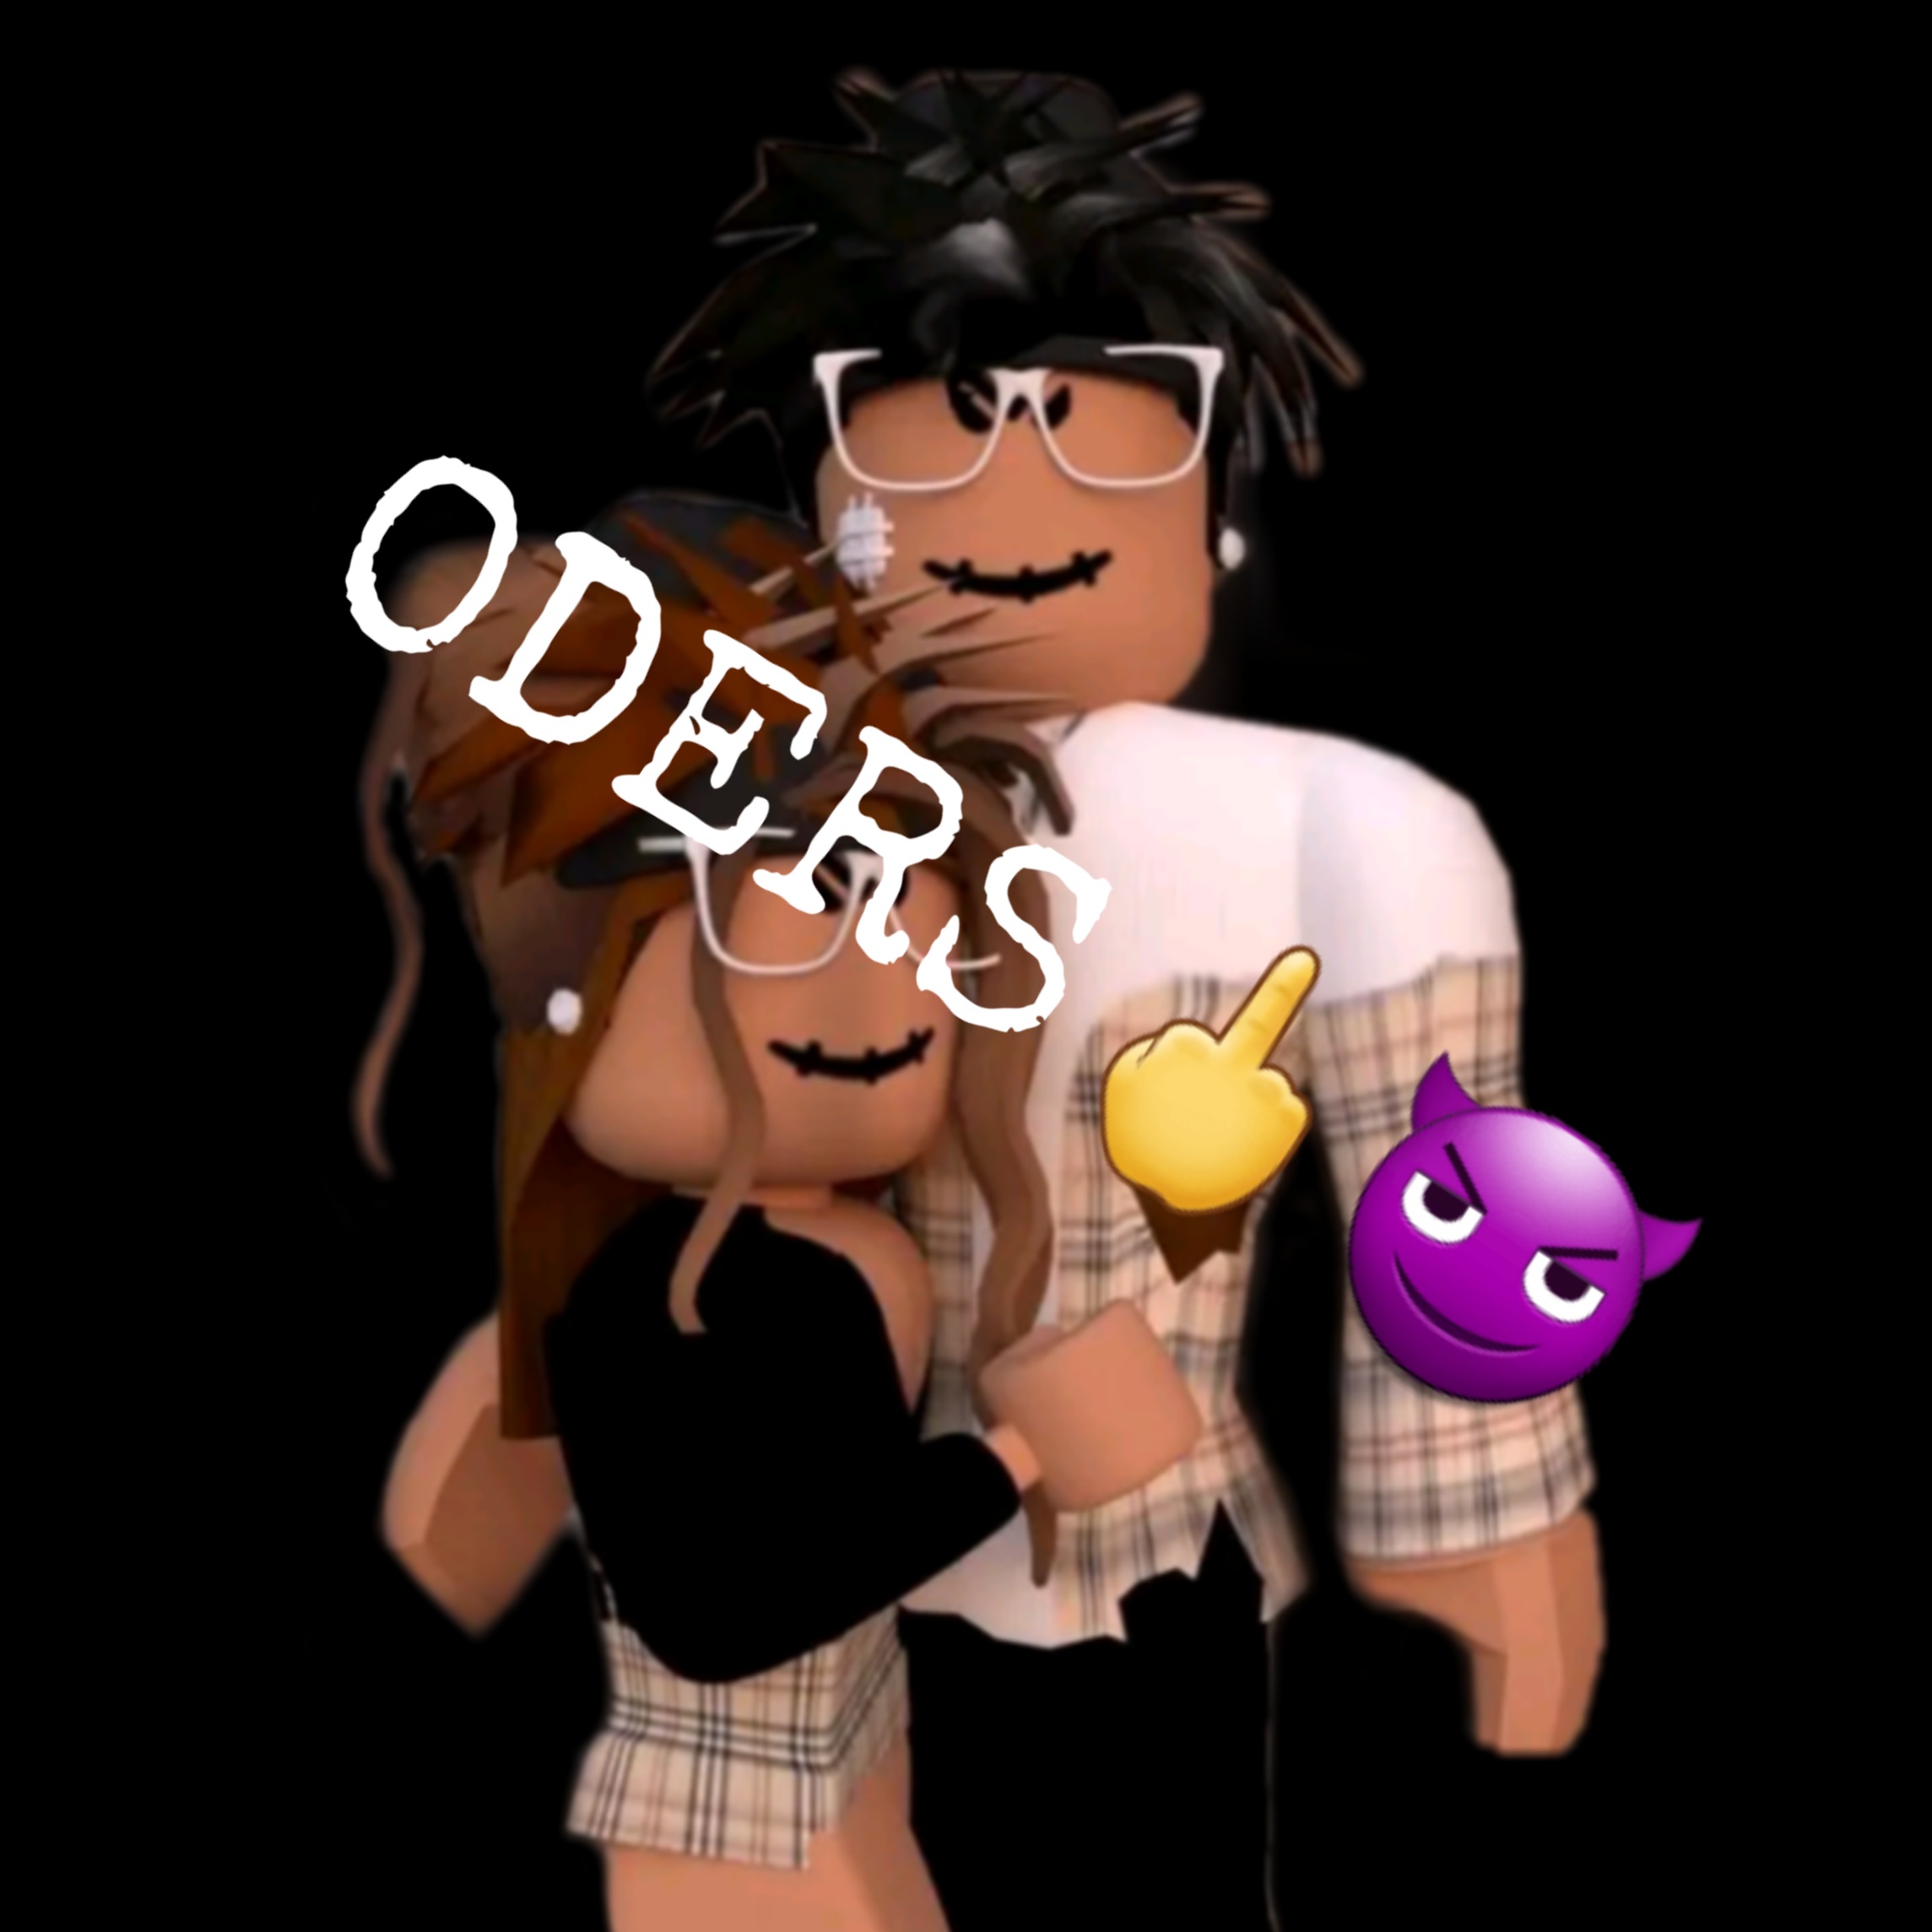 Oders Stitchface Image By Anes O - roblox oder images